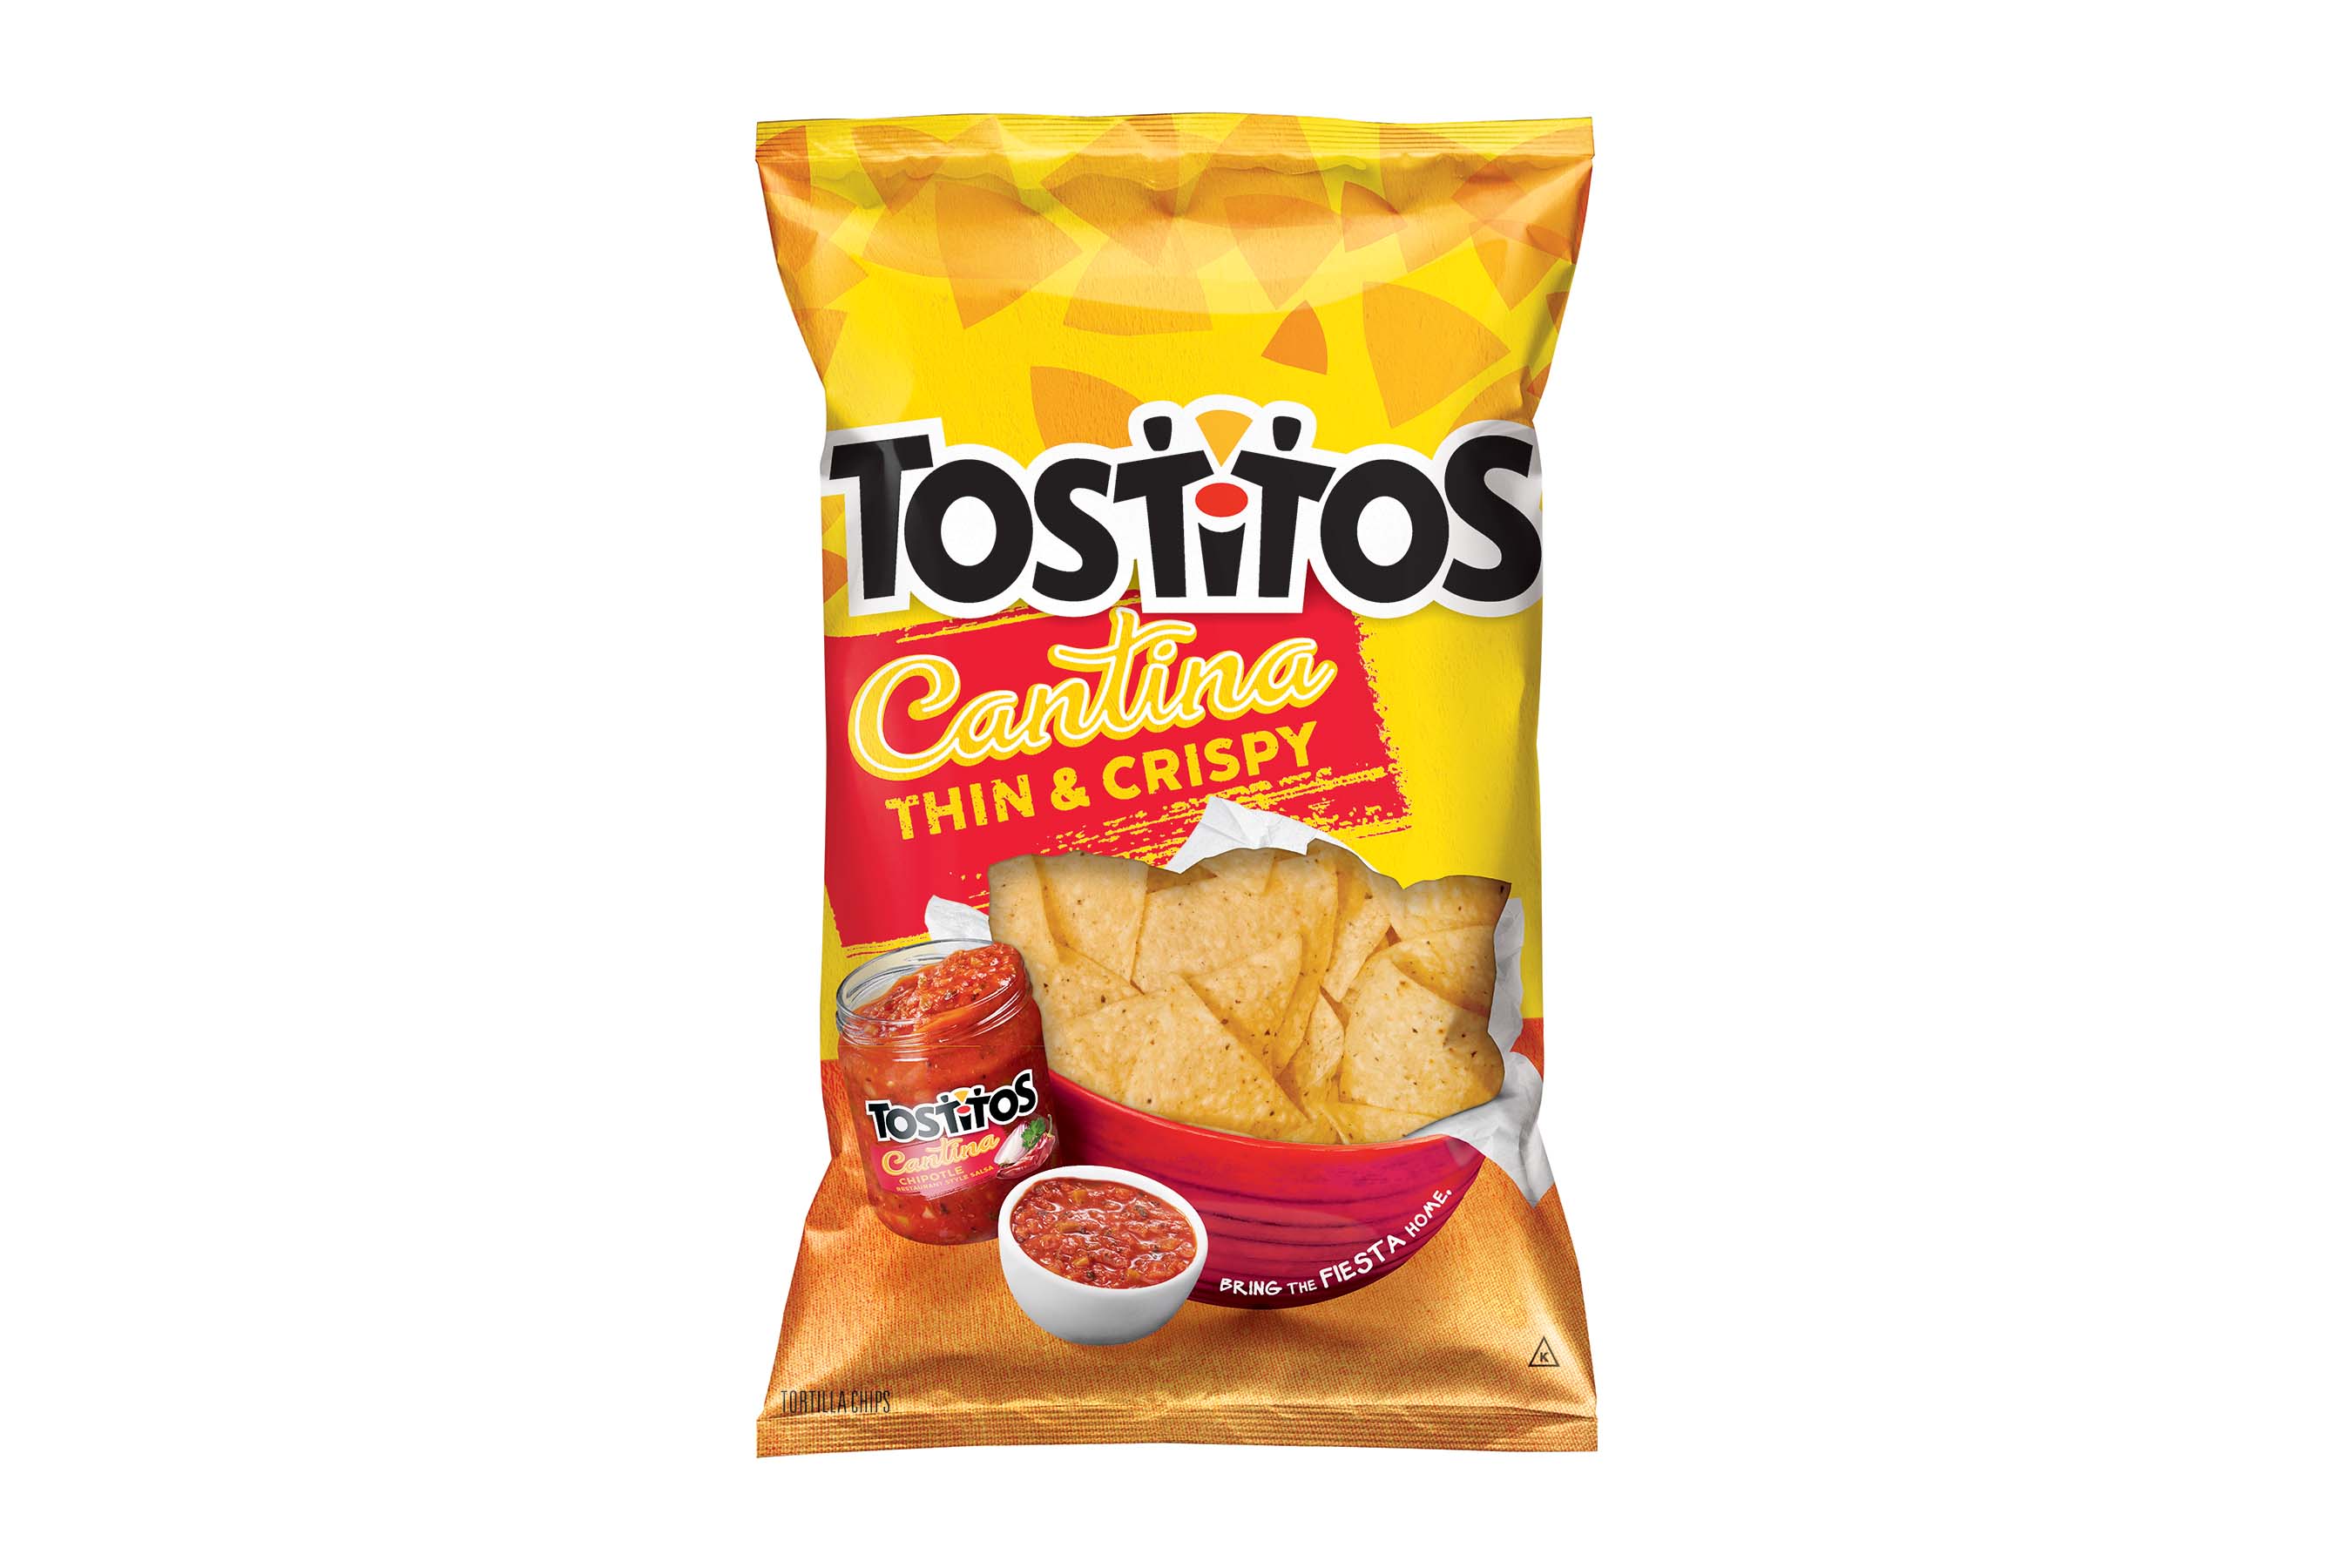 Tostitos Cantina Thin & Crispy tortilla chips taste so authentic, you’ll think you stepped into a real Mexican cantina. They’re light, thin, crispy and pair perfectly with restaurant style salsas.